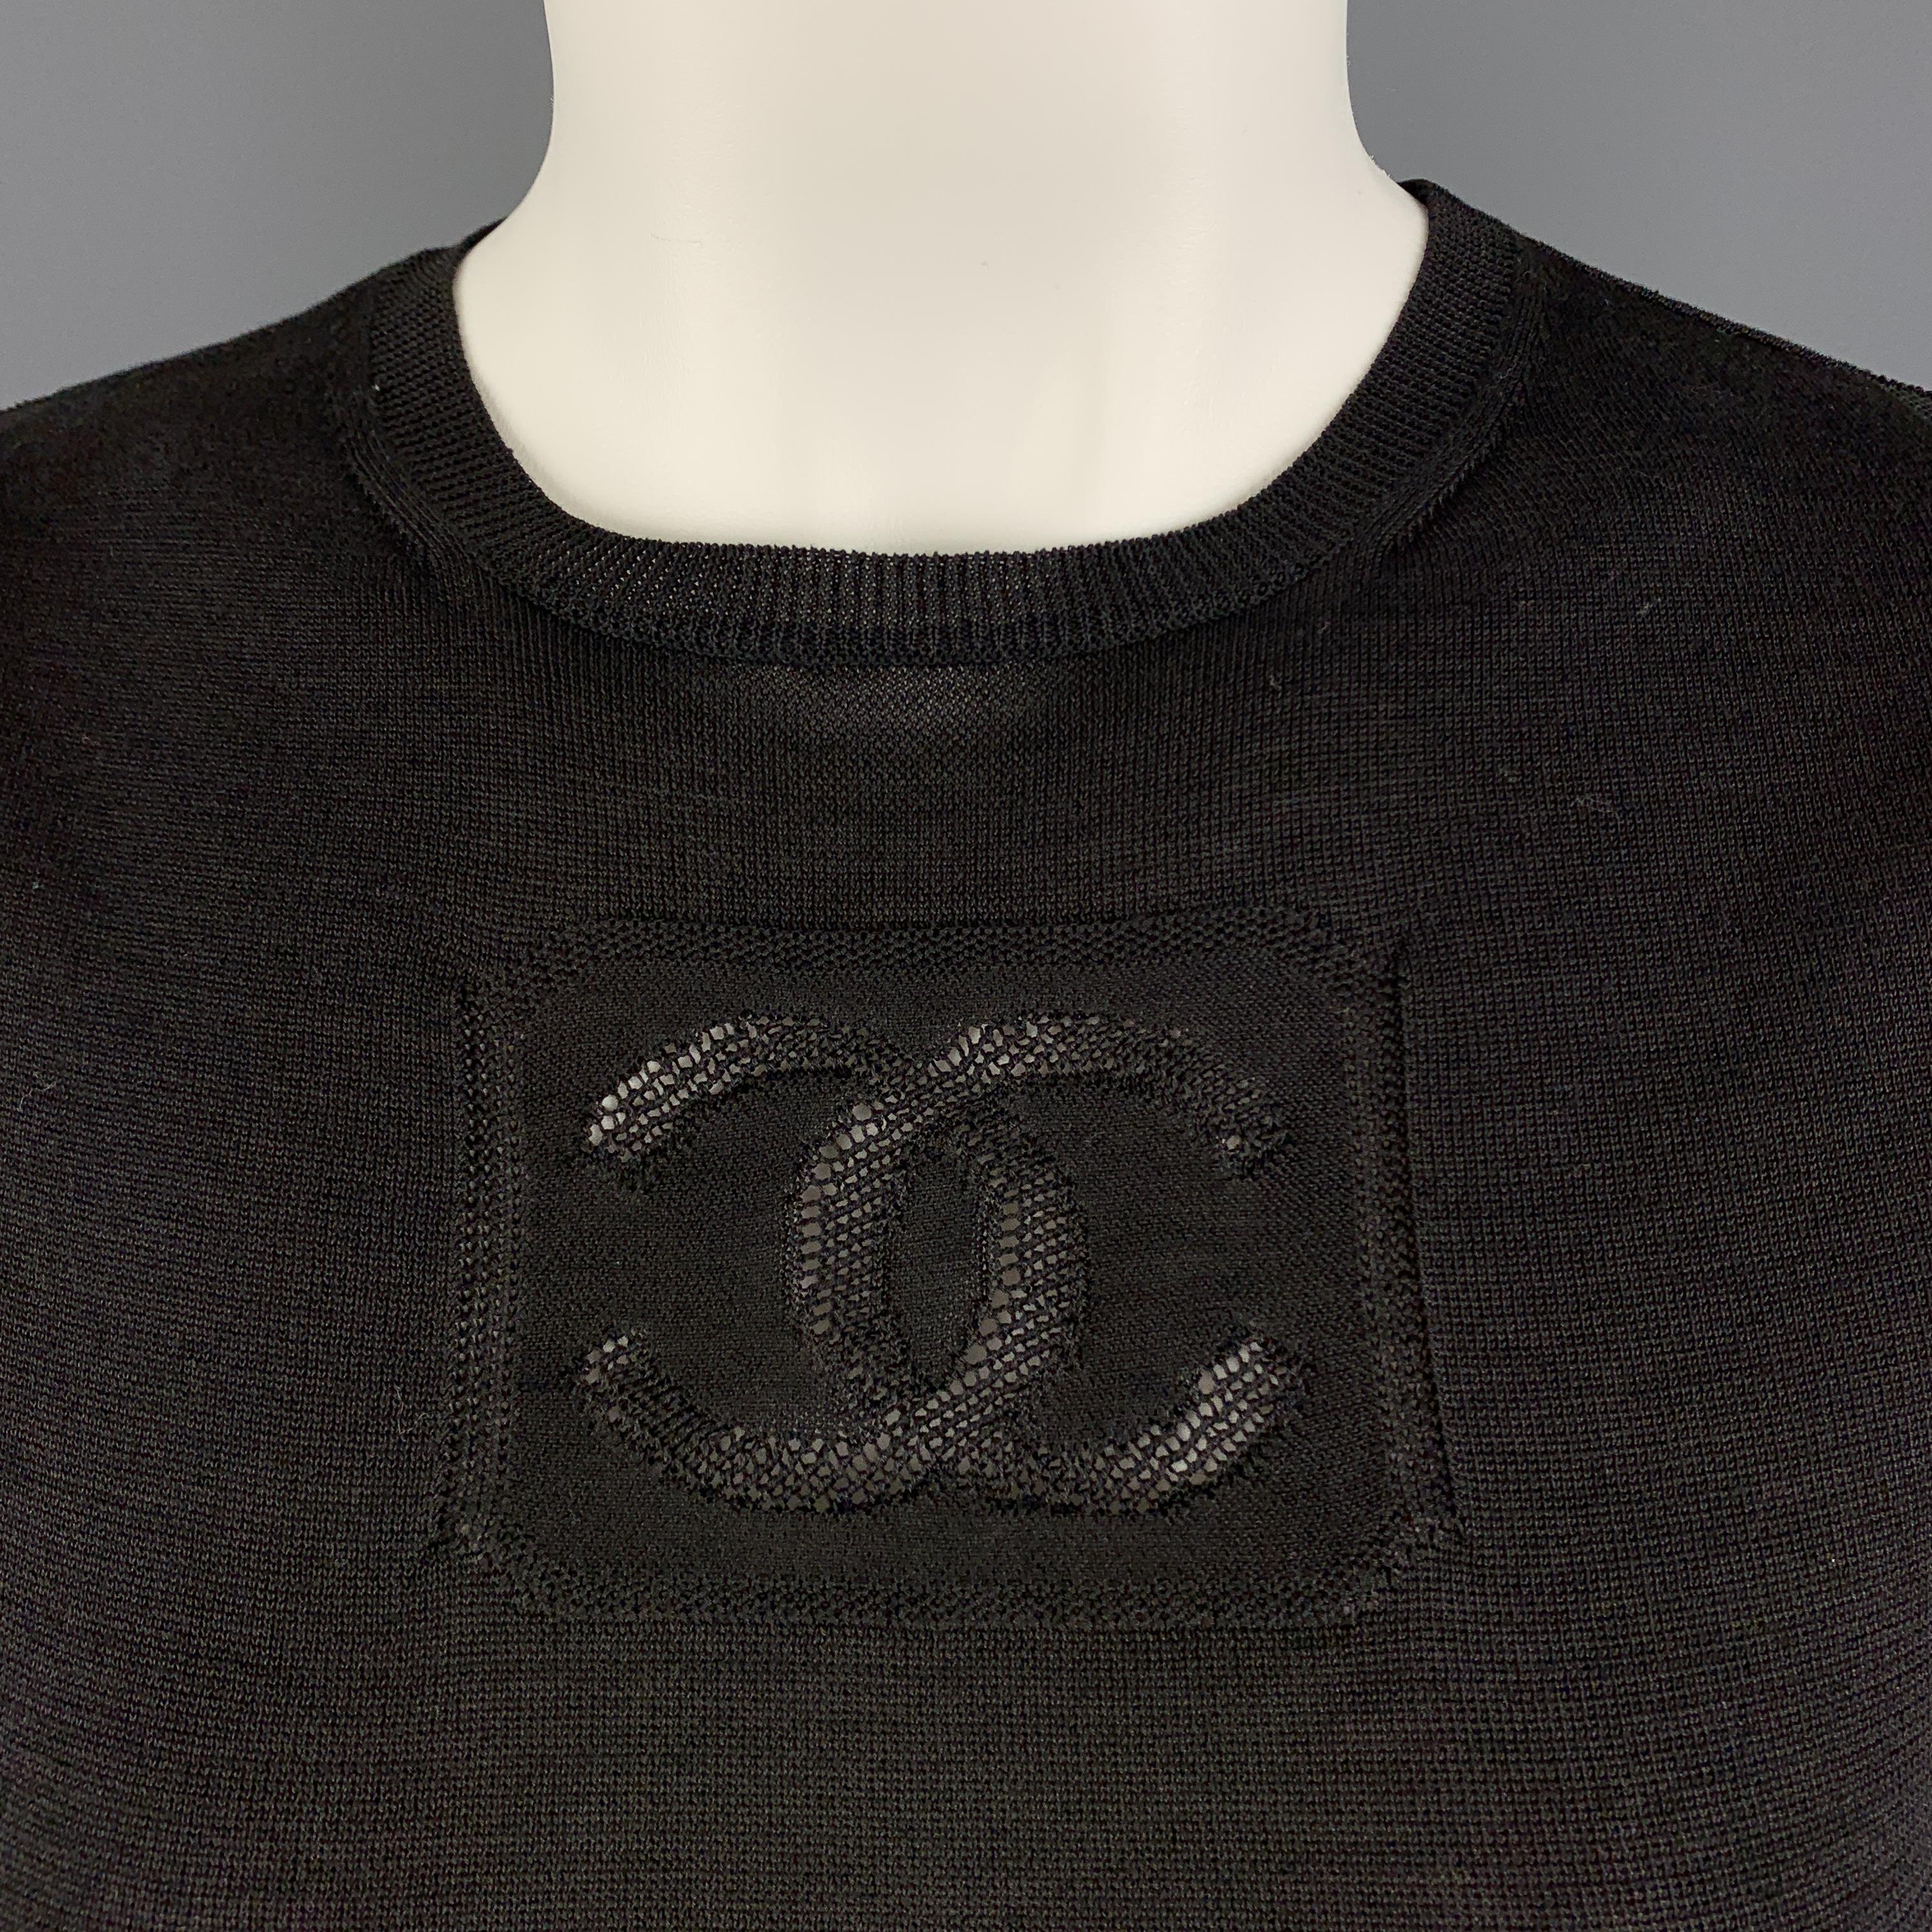 CHANEL Spring 2003 T shirt comes in black fine cotton knit with a CC logo. Made in France.

Excellent Pre-Owned Condition.
Marked: FR 34

Measurements:

Shoulder: 14 in.
Bust: 32 in.
Sleeve: 5 in.
Length: 20 in.